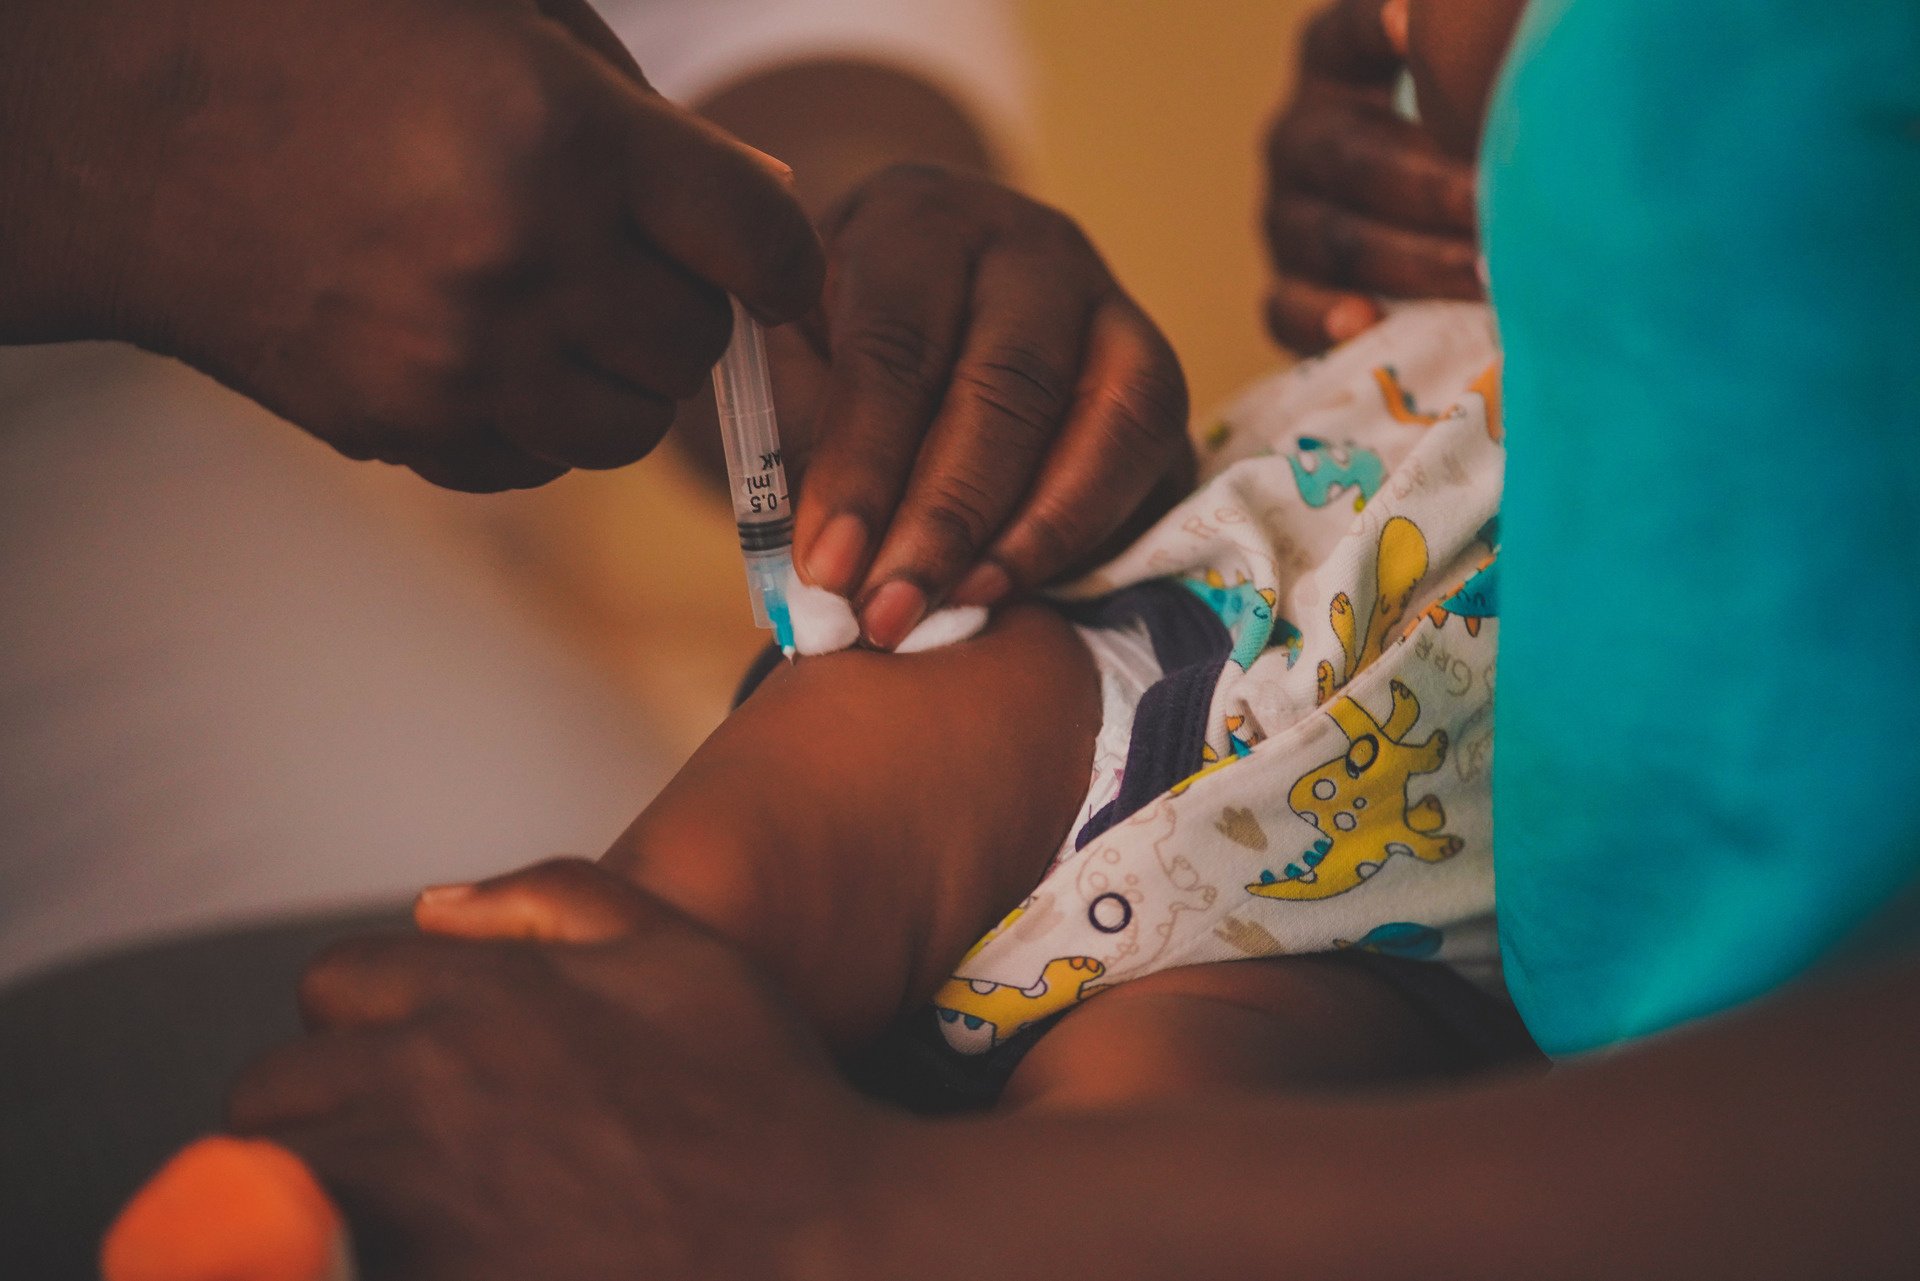 All-of- society approach is steppingstone for scaling up vaccination activities in Nigeria